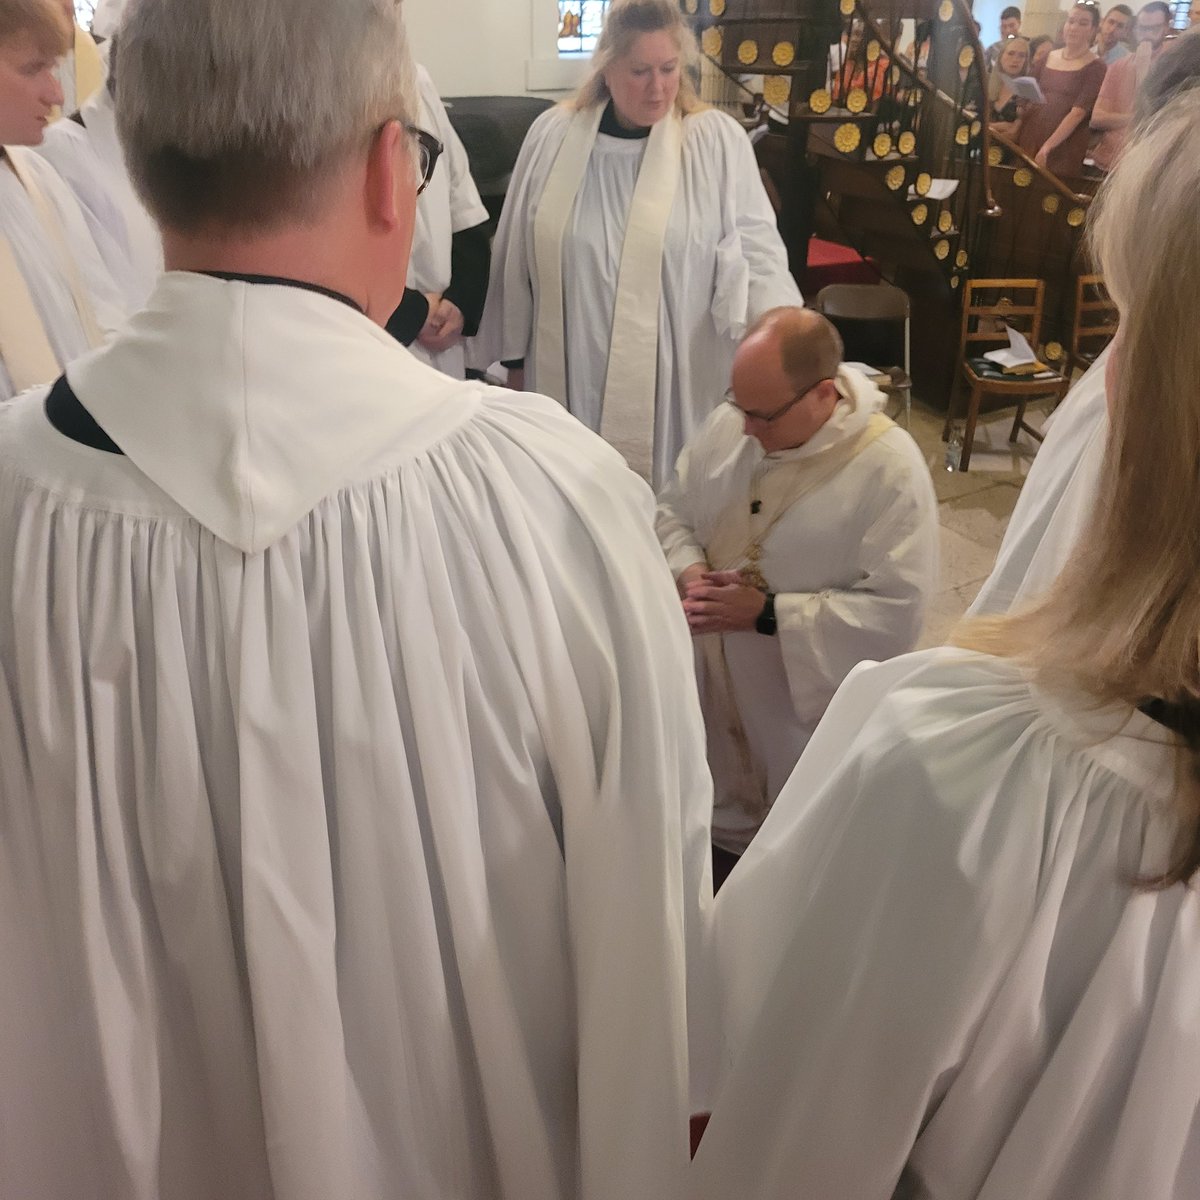 A beautiful moment at the end of today's ordination when @bpedmonton was prayed for by the newly ordained priests and leaving his crozier and mitre on the altar. 
Once a deacon, always a deacon
#TeamEdmonton